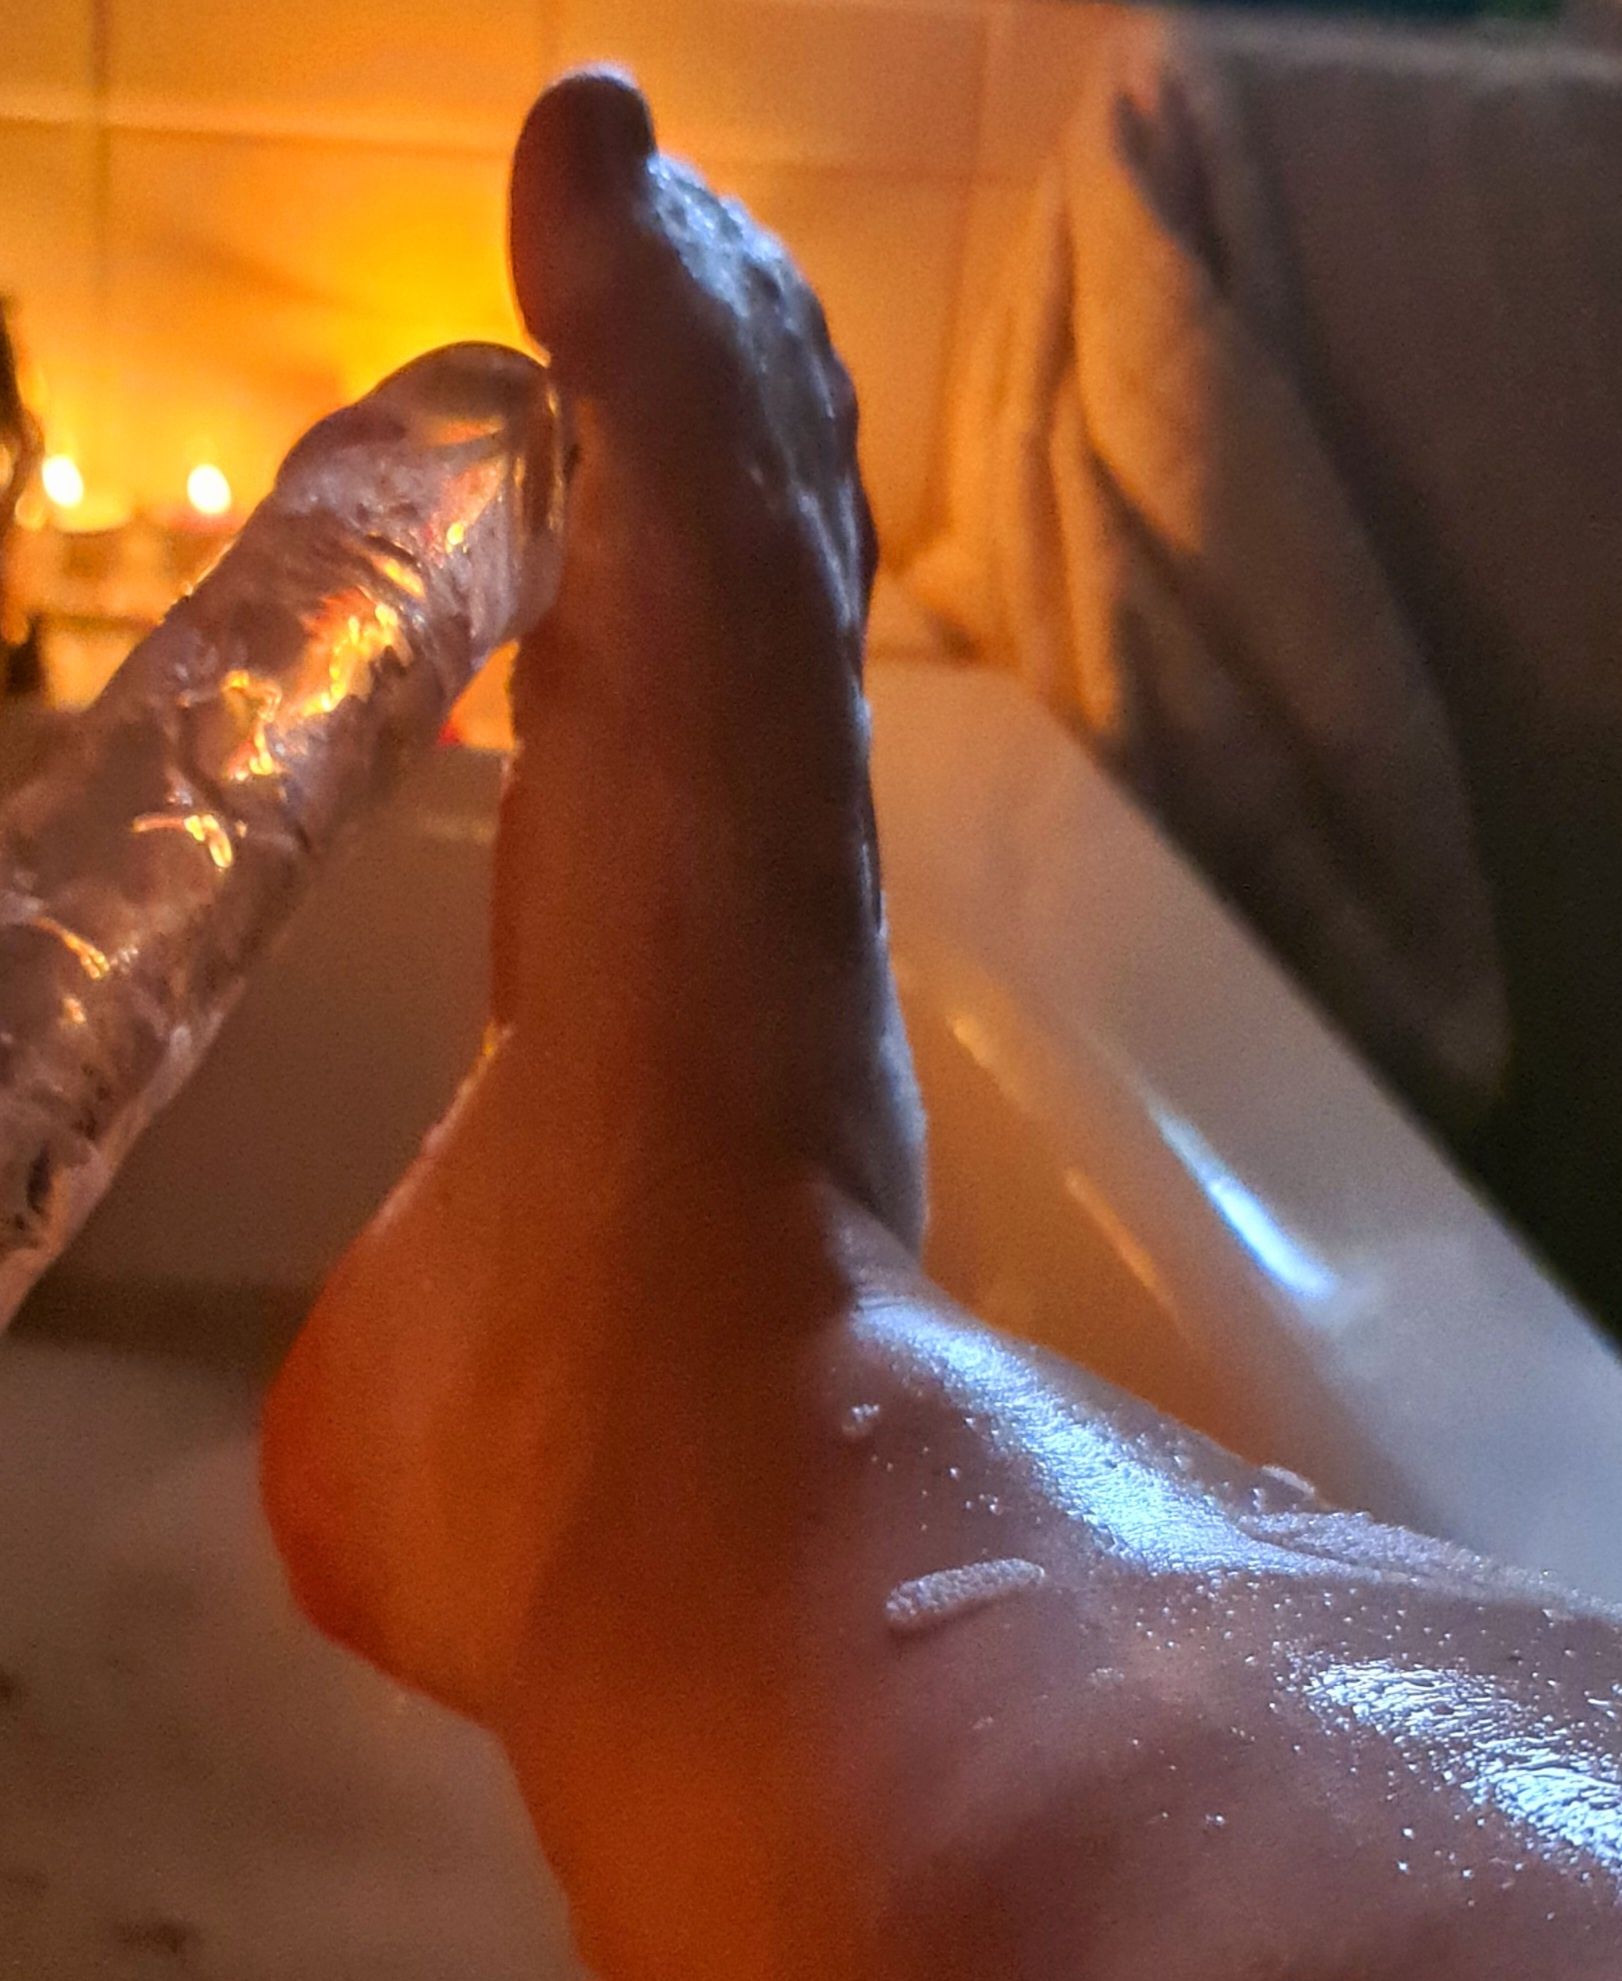 Foot and sextoy . Bathtime